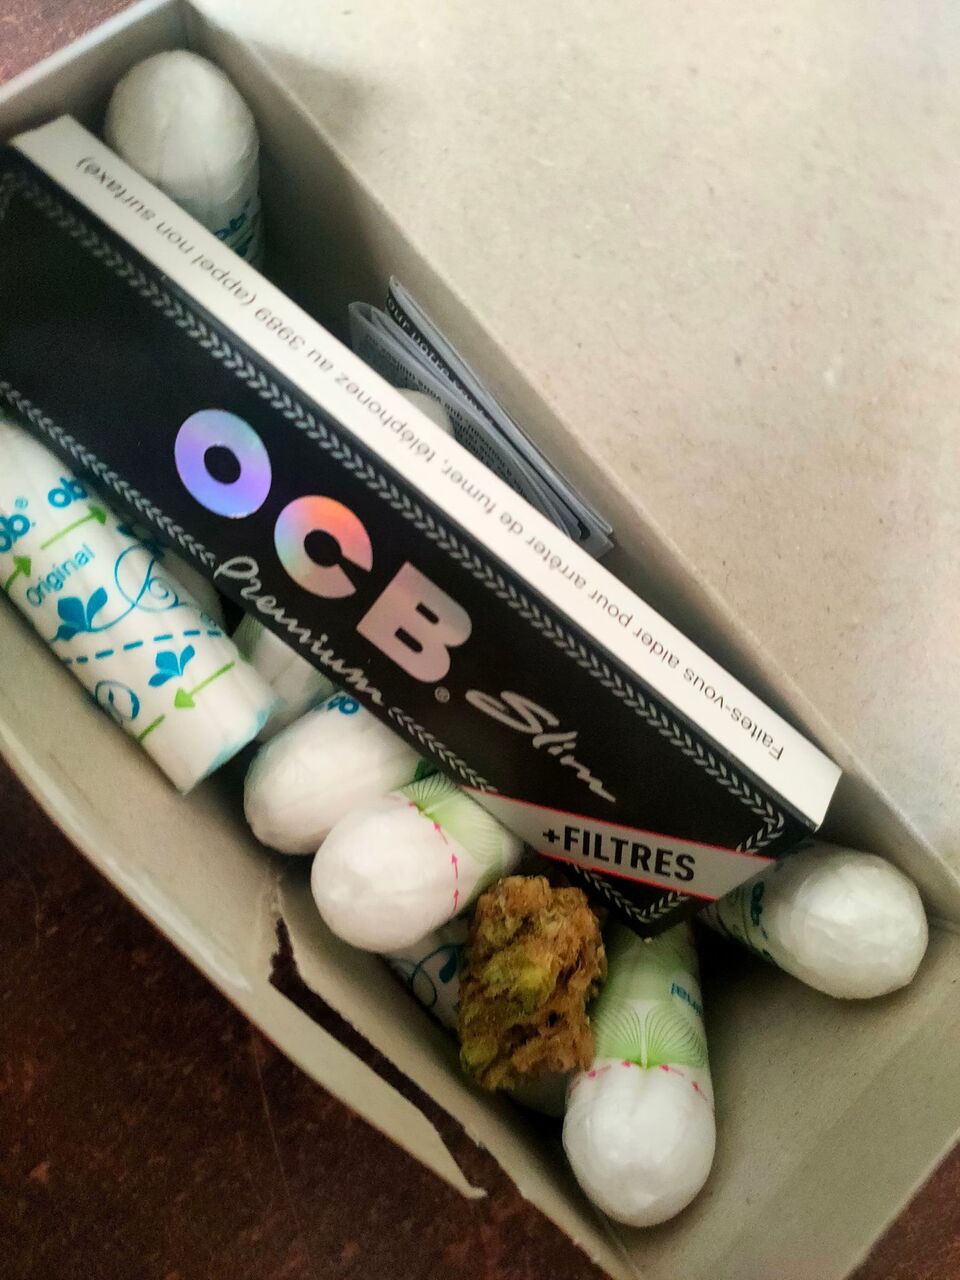 Weed and rolling paper in a box of tampons